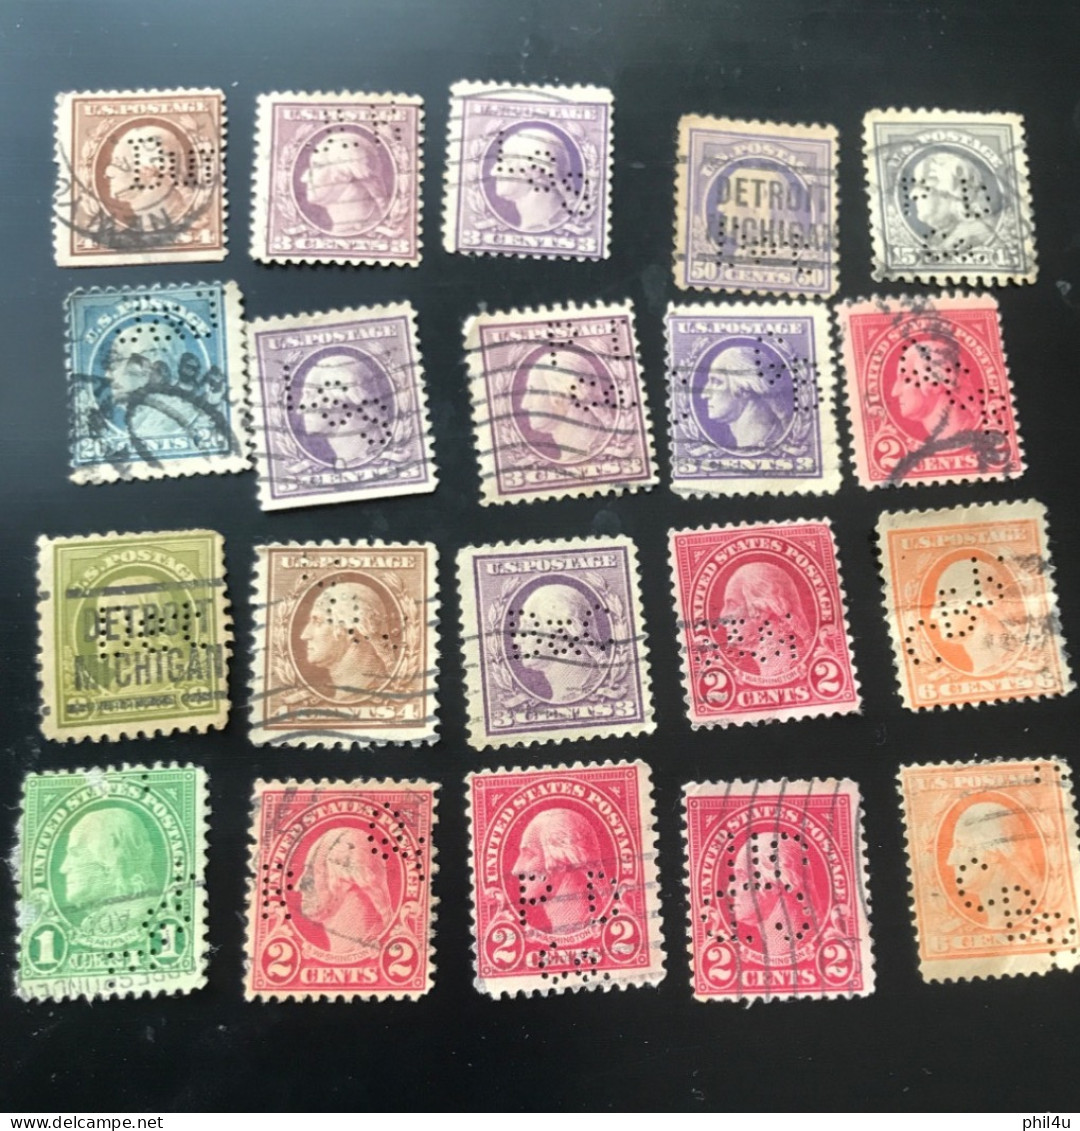 US 35+ Lot Used Old Stamps Perfin With Few Stamps Faults See Scan - Perfin